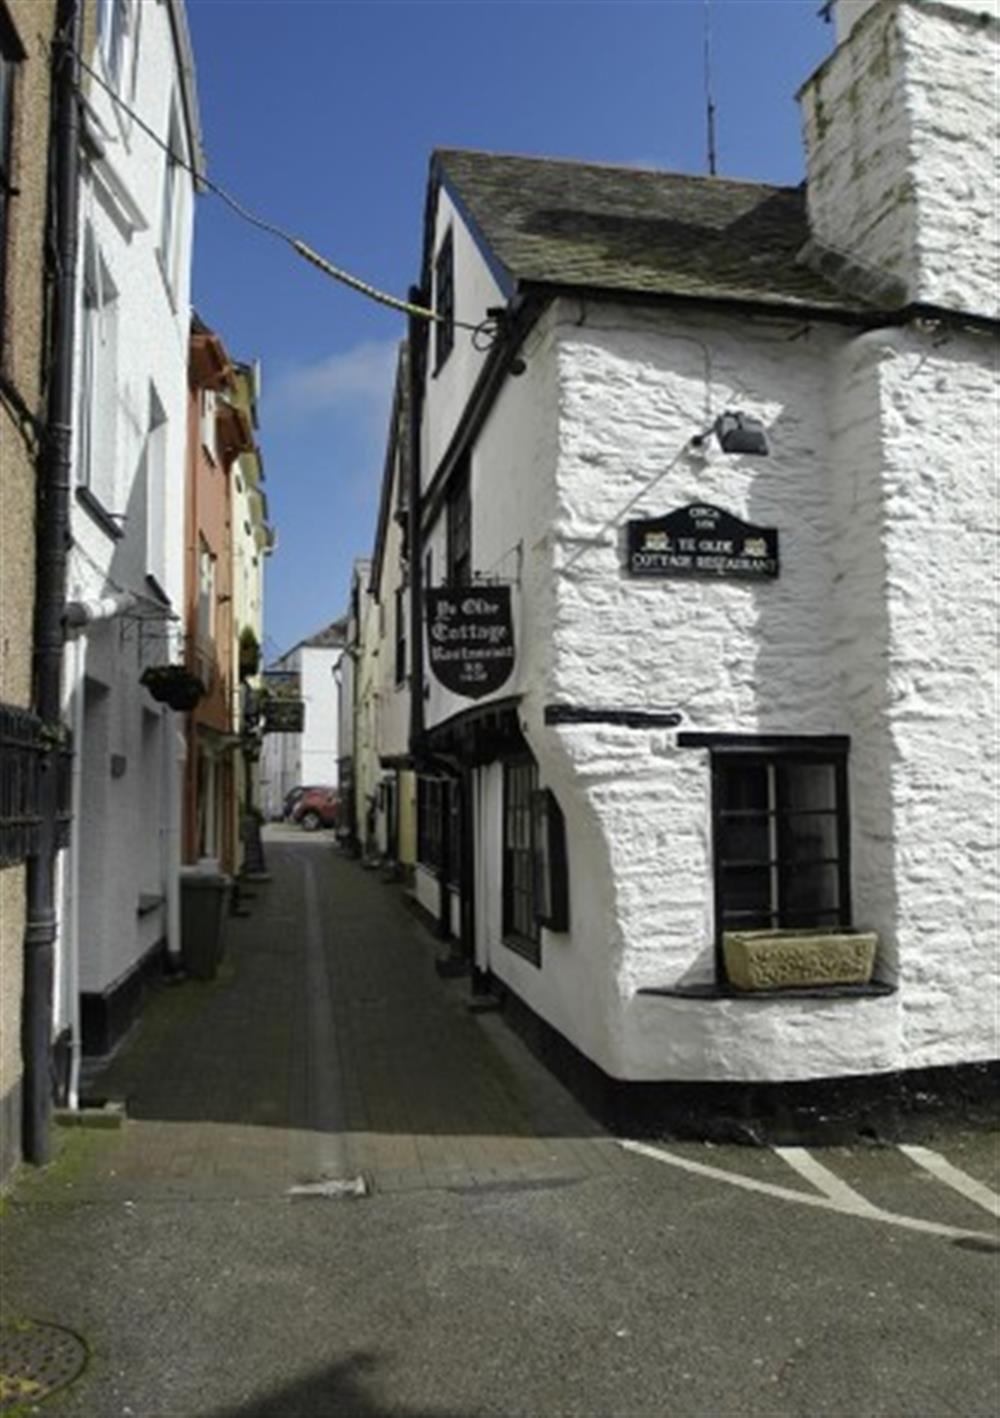 There are plenty of back streets in Looe to explore at Glintings in Polperro